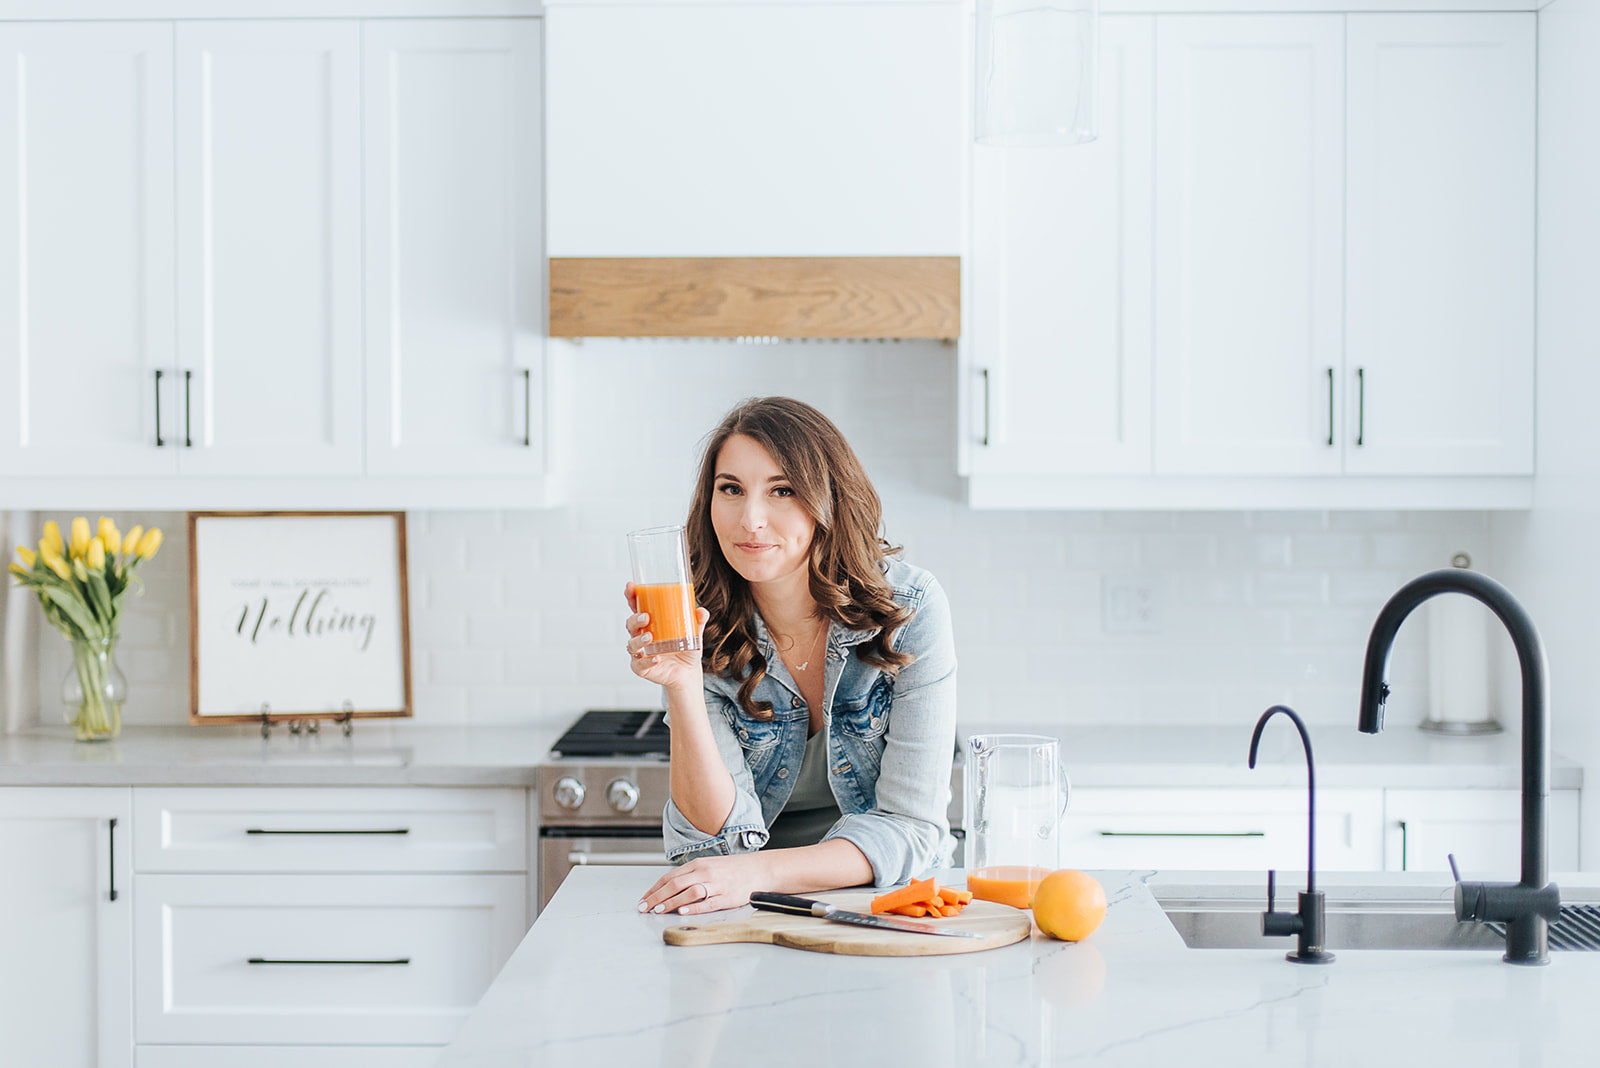 Founder, Ewa Reid, leaning on a kitchen counter and holding a glass of fresh squeezed orange juice.